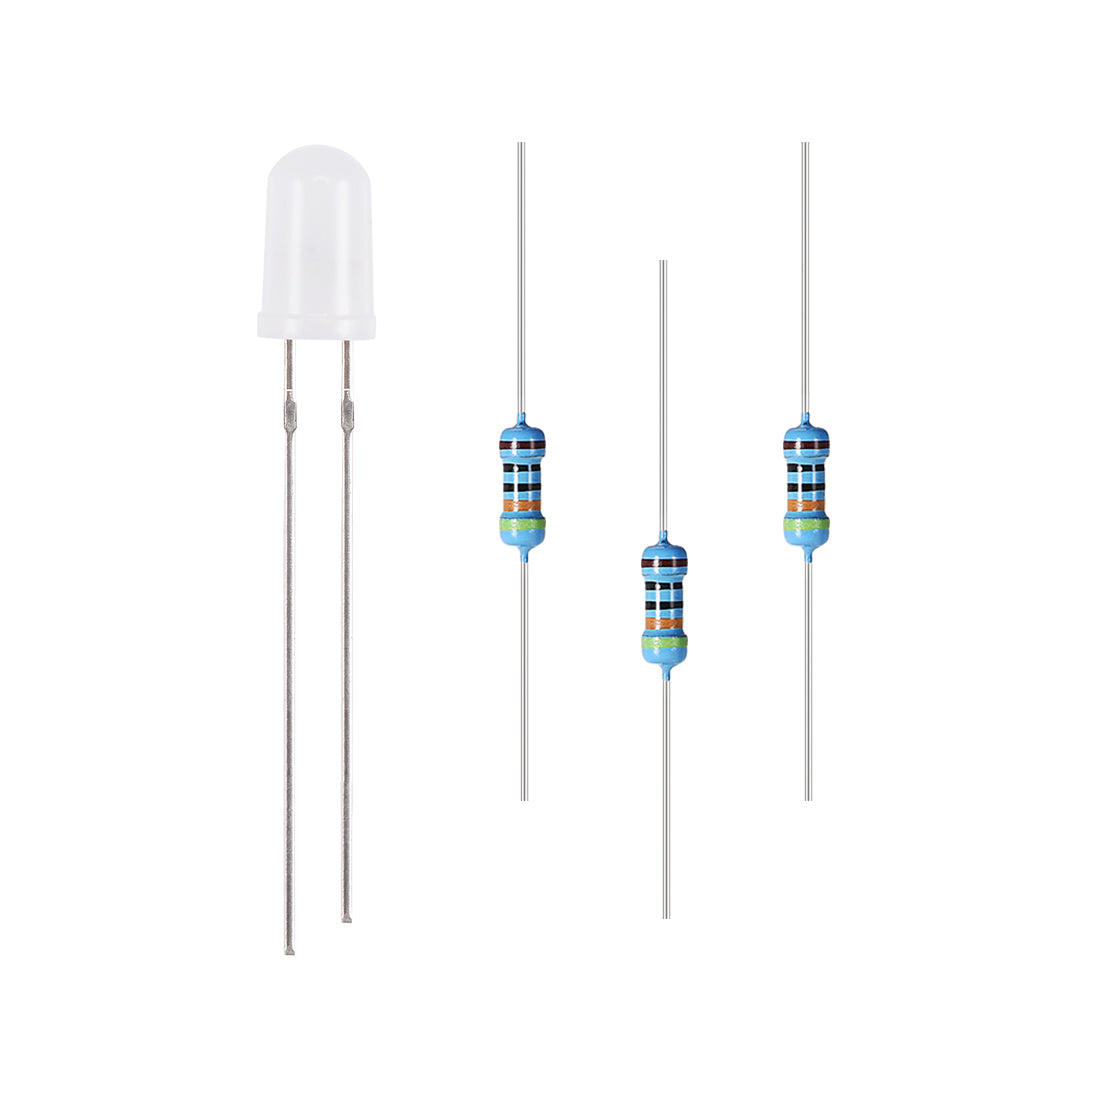 uxcell Uxcell 100Set 5mm LED Kit Diffused Slow-Flashing Super Bright 29mm Pin W Resistors